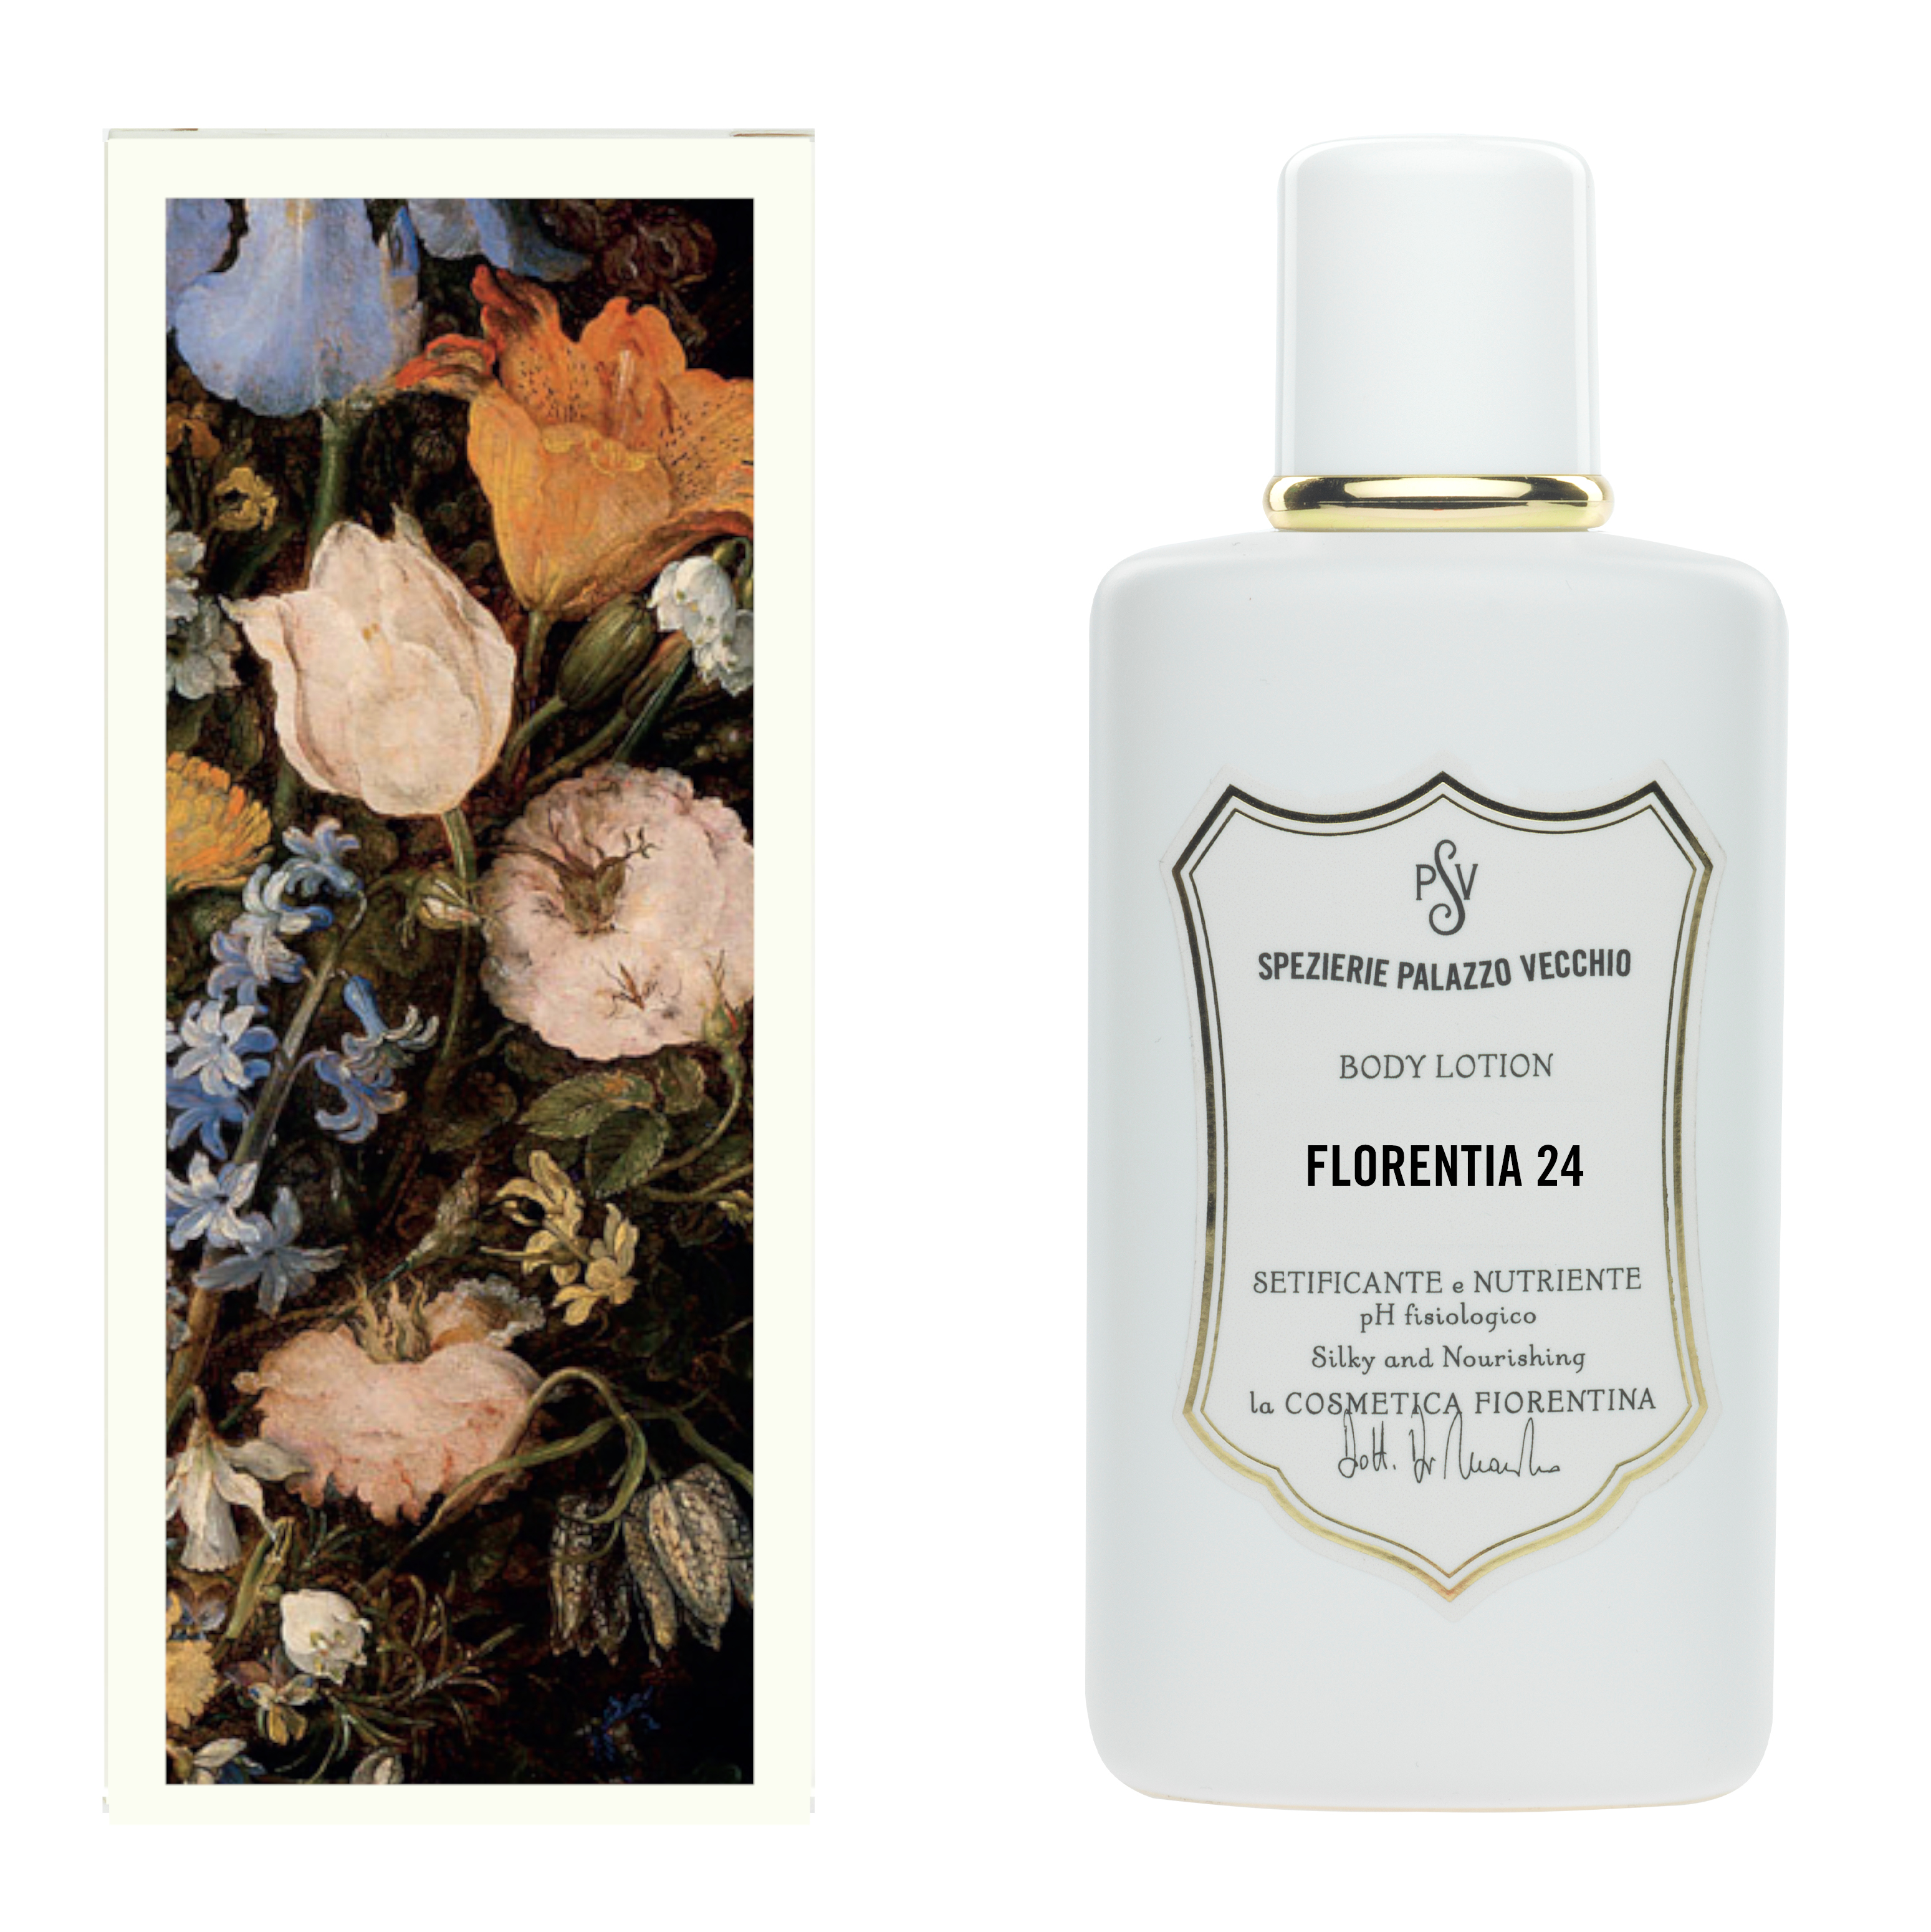 FLORENTIA 24 Rose and Flowers Body Lotion-0